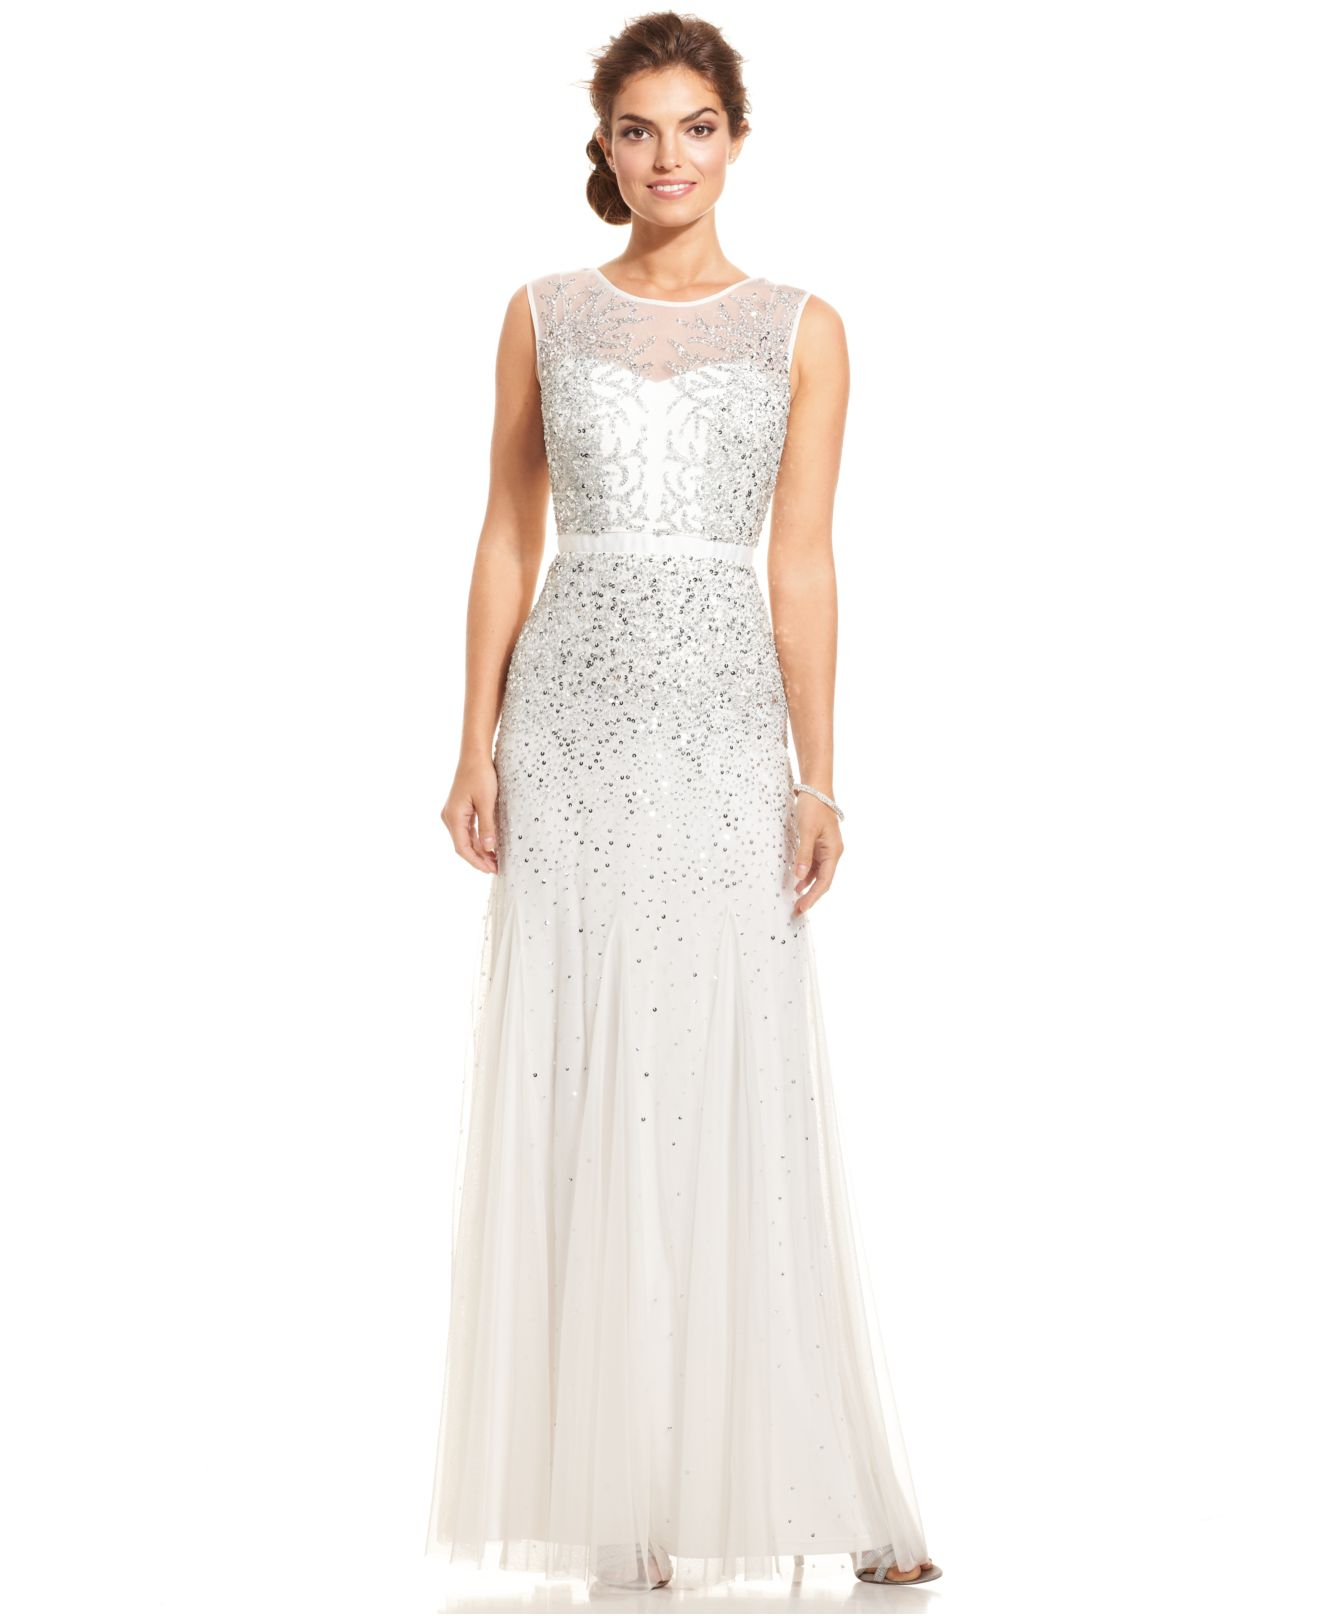 Lyst - Adrianna Papell Sleeveless Beaded Illusion Gown in White